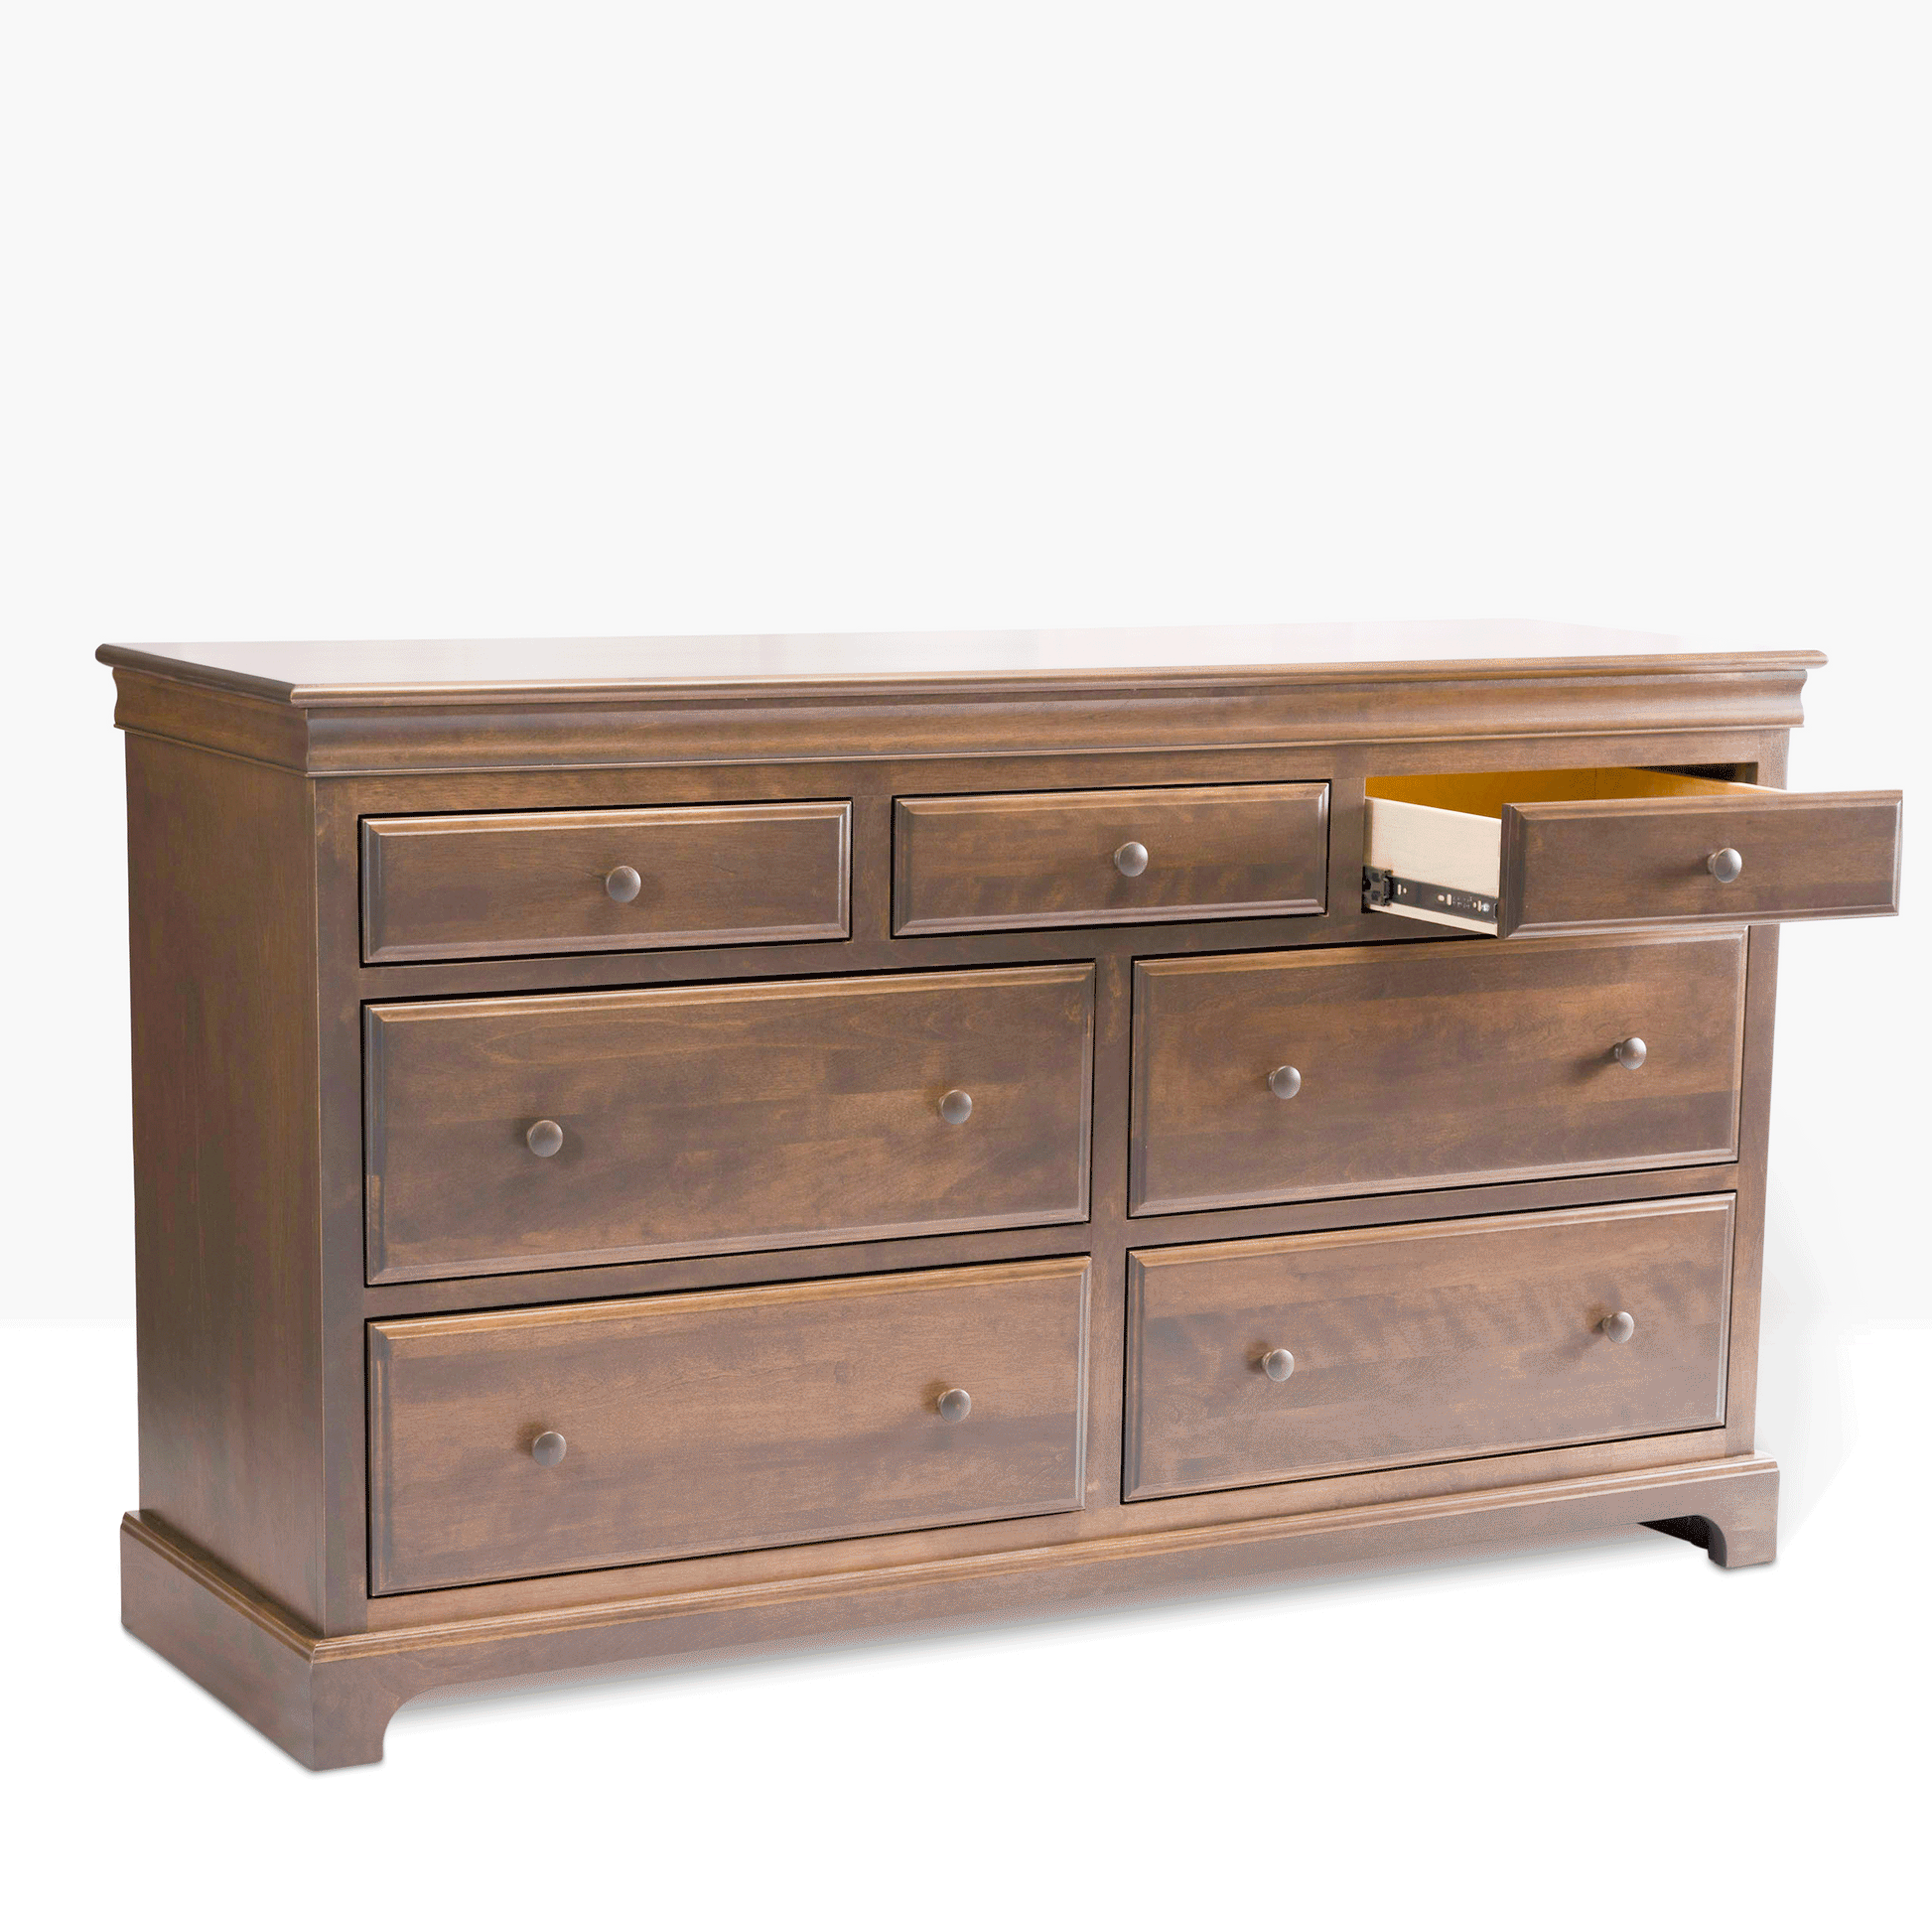 Acadia Madison Seven Drawer Dresser, built in birch with three small drawers and four large drawers. Shown with drawers open to highlight storage space. Pictured in Driftwood finish.